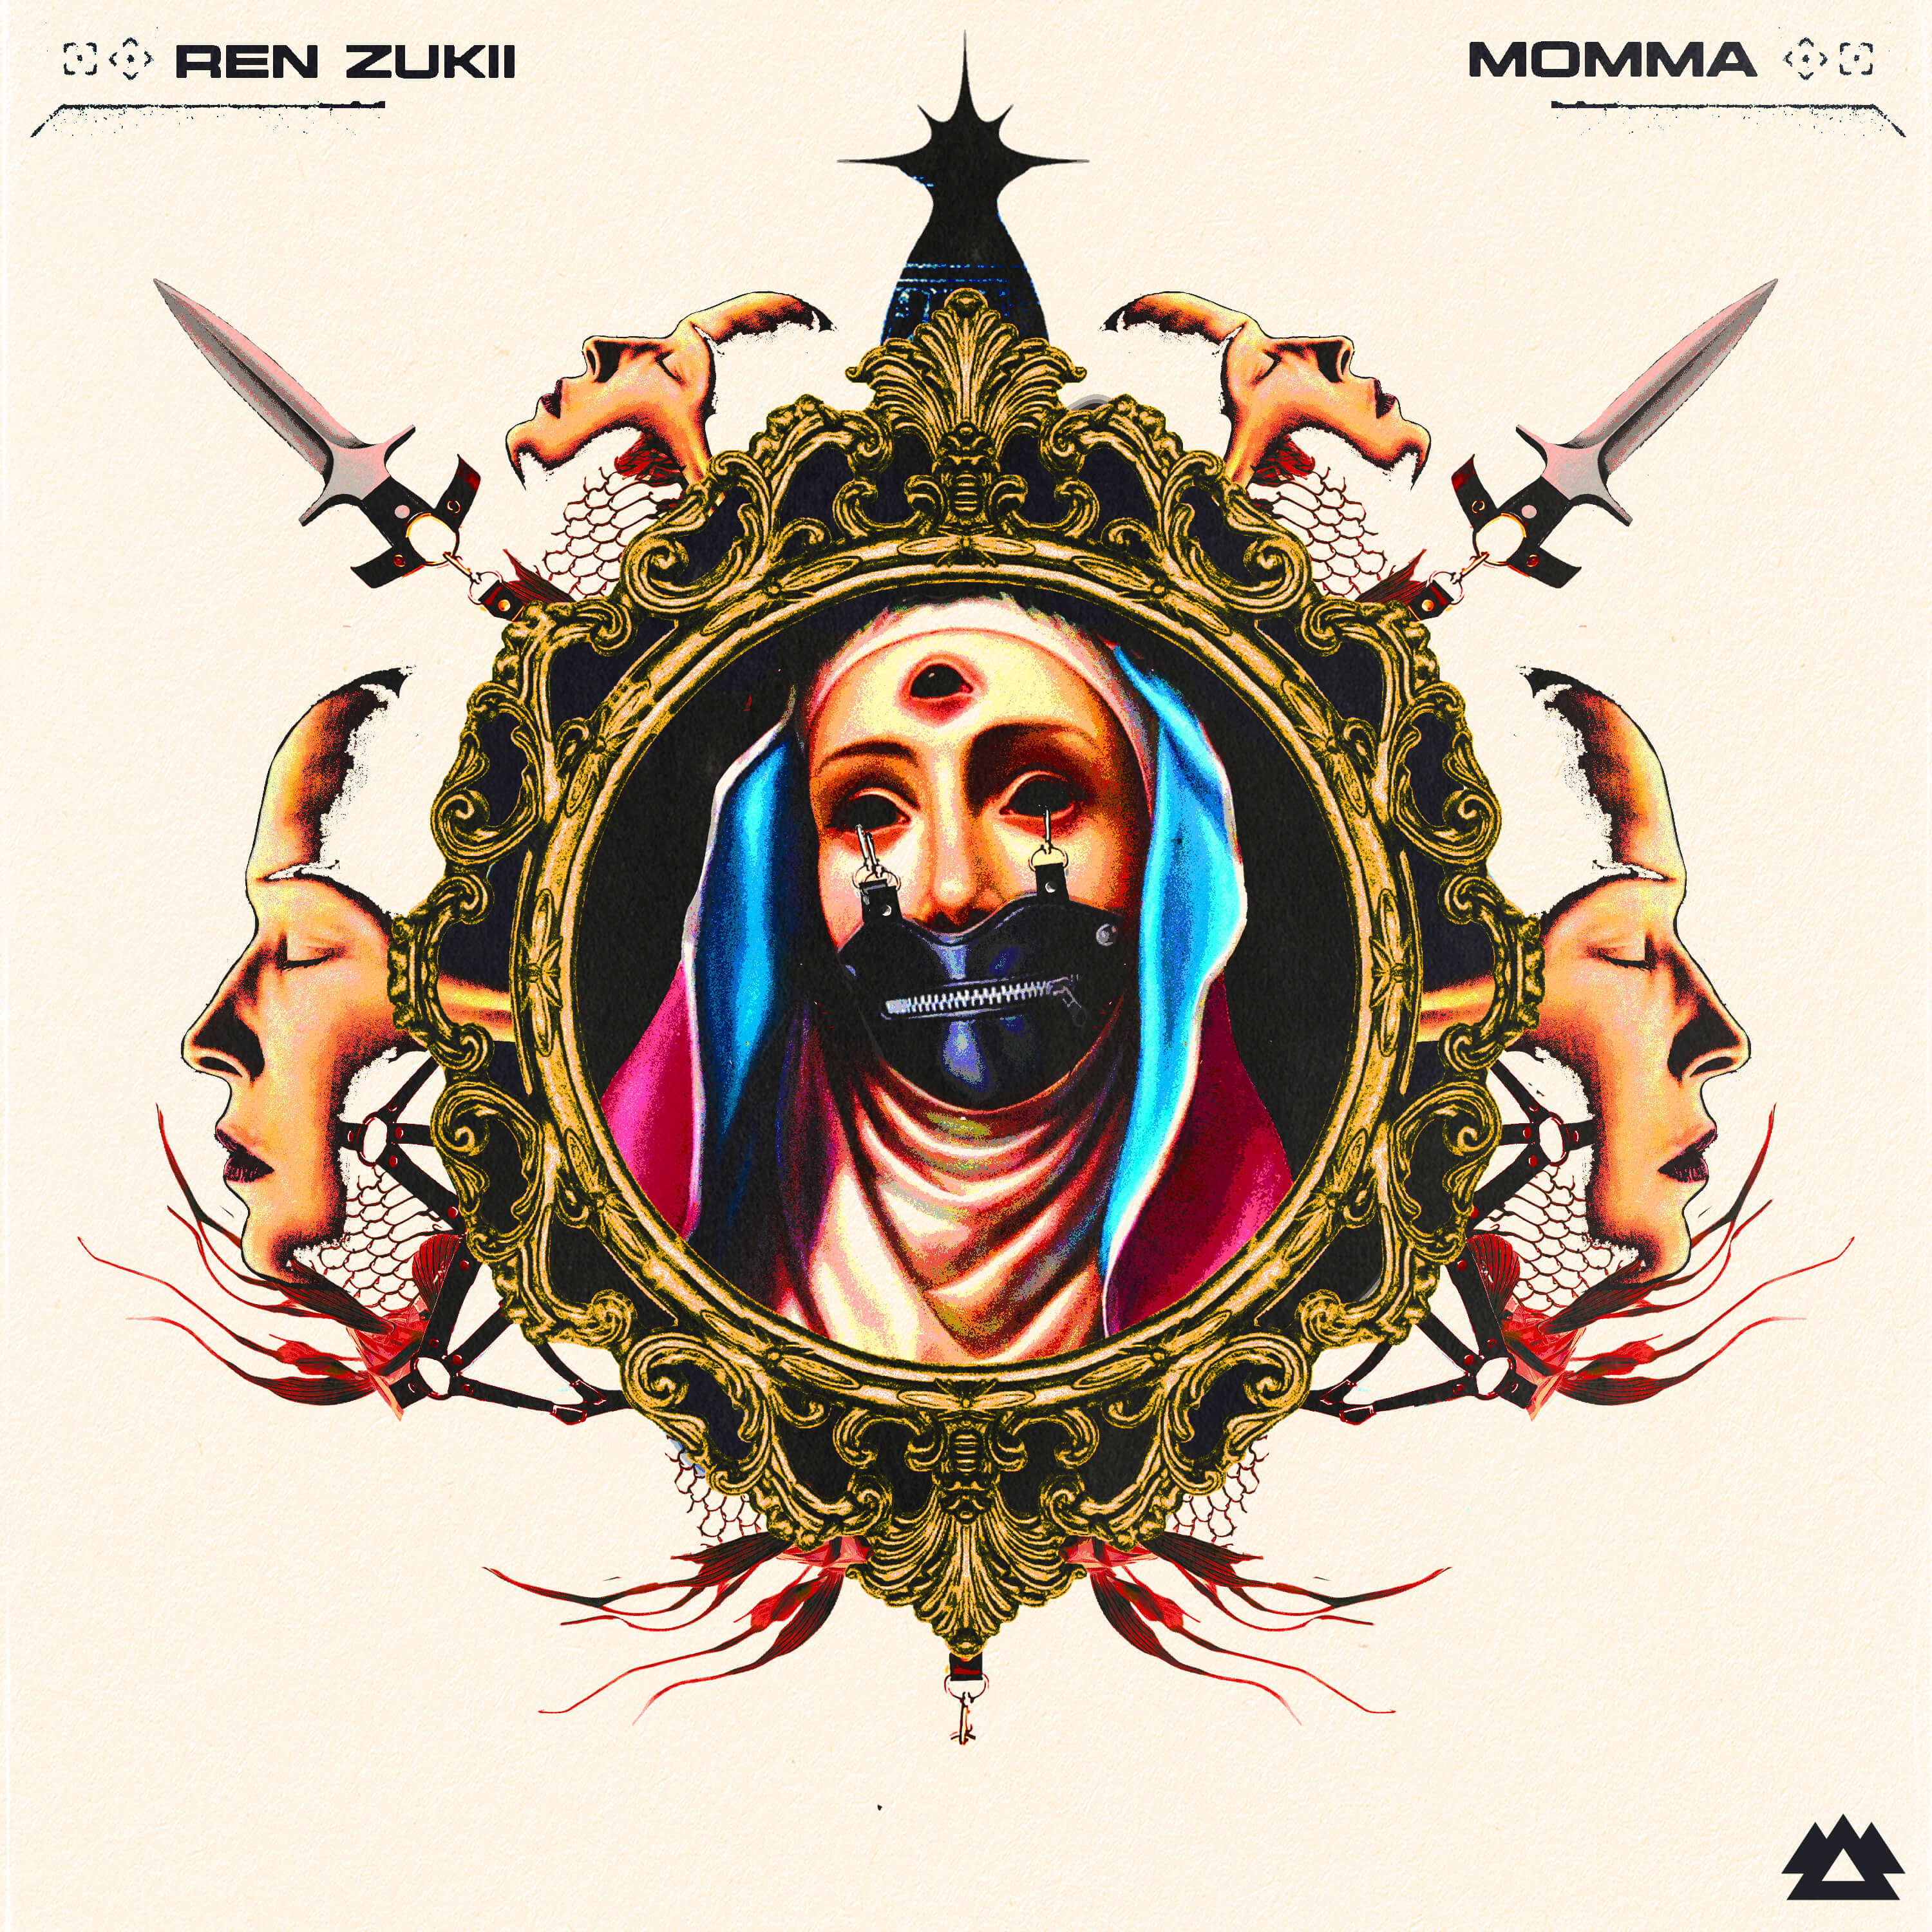 Ren Zukii Channels Love and Power With New Single, ‘MOMMA’